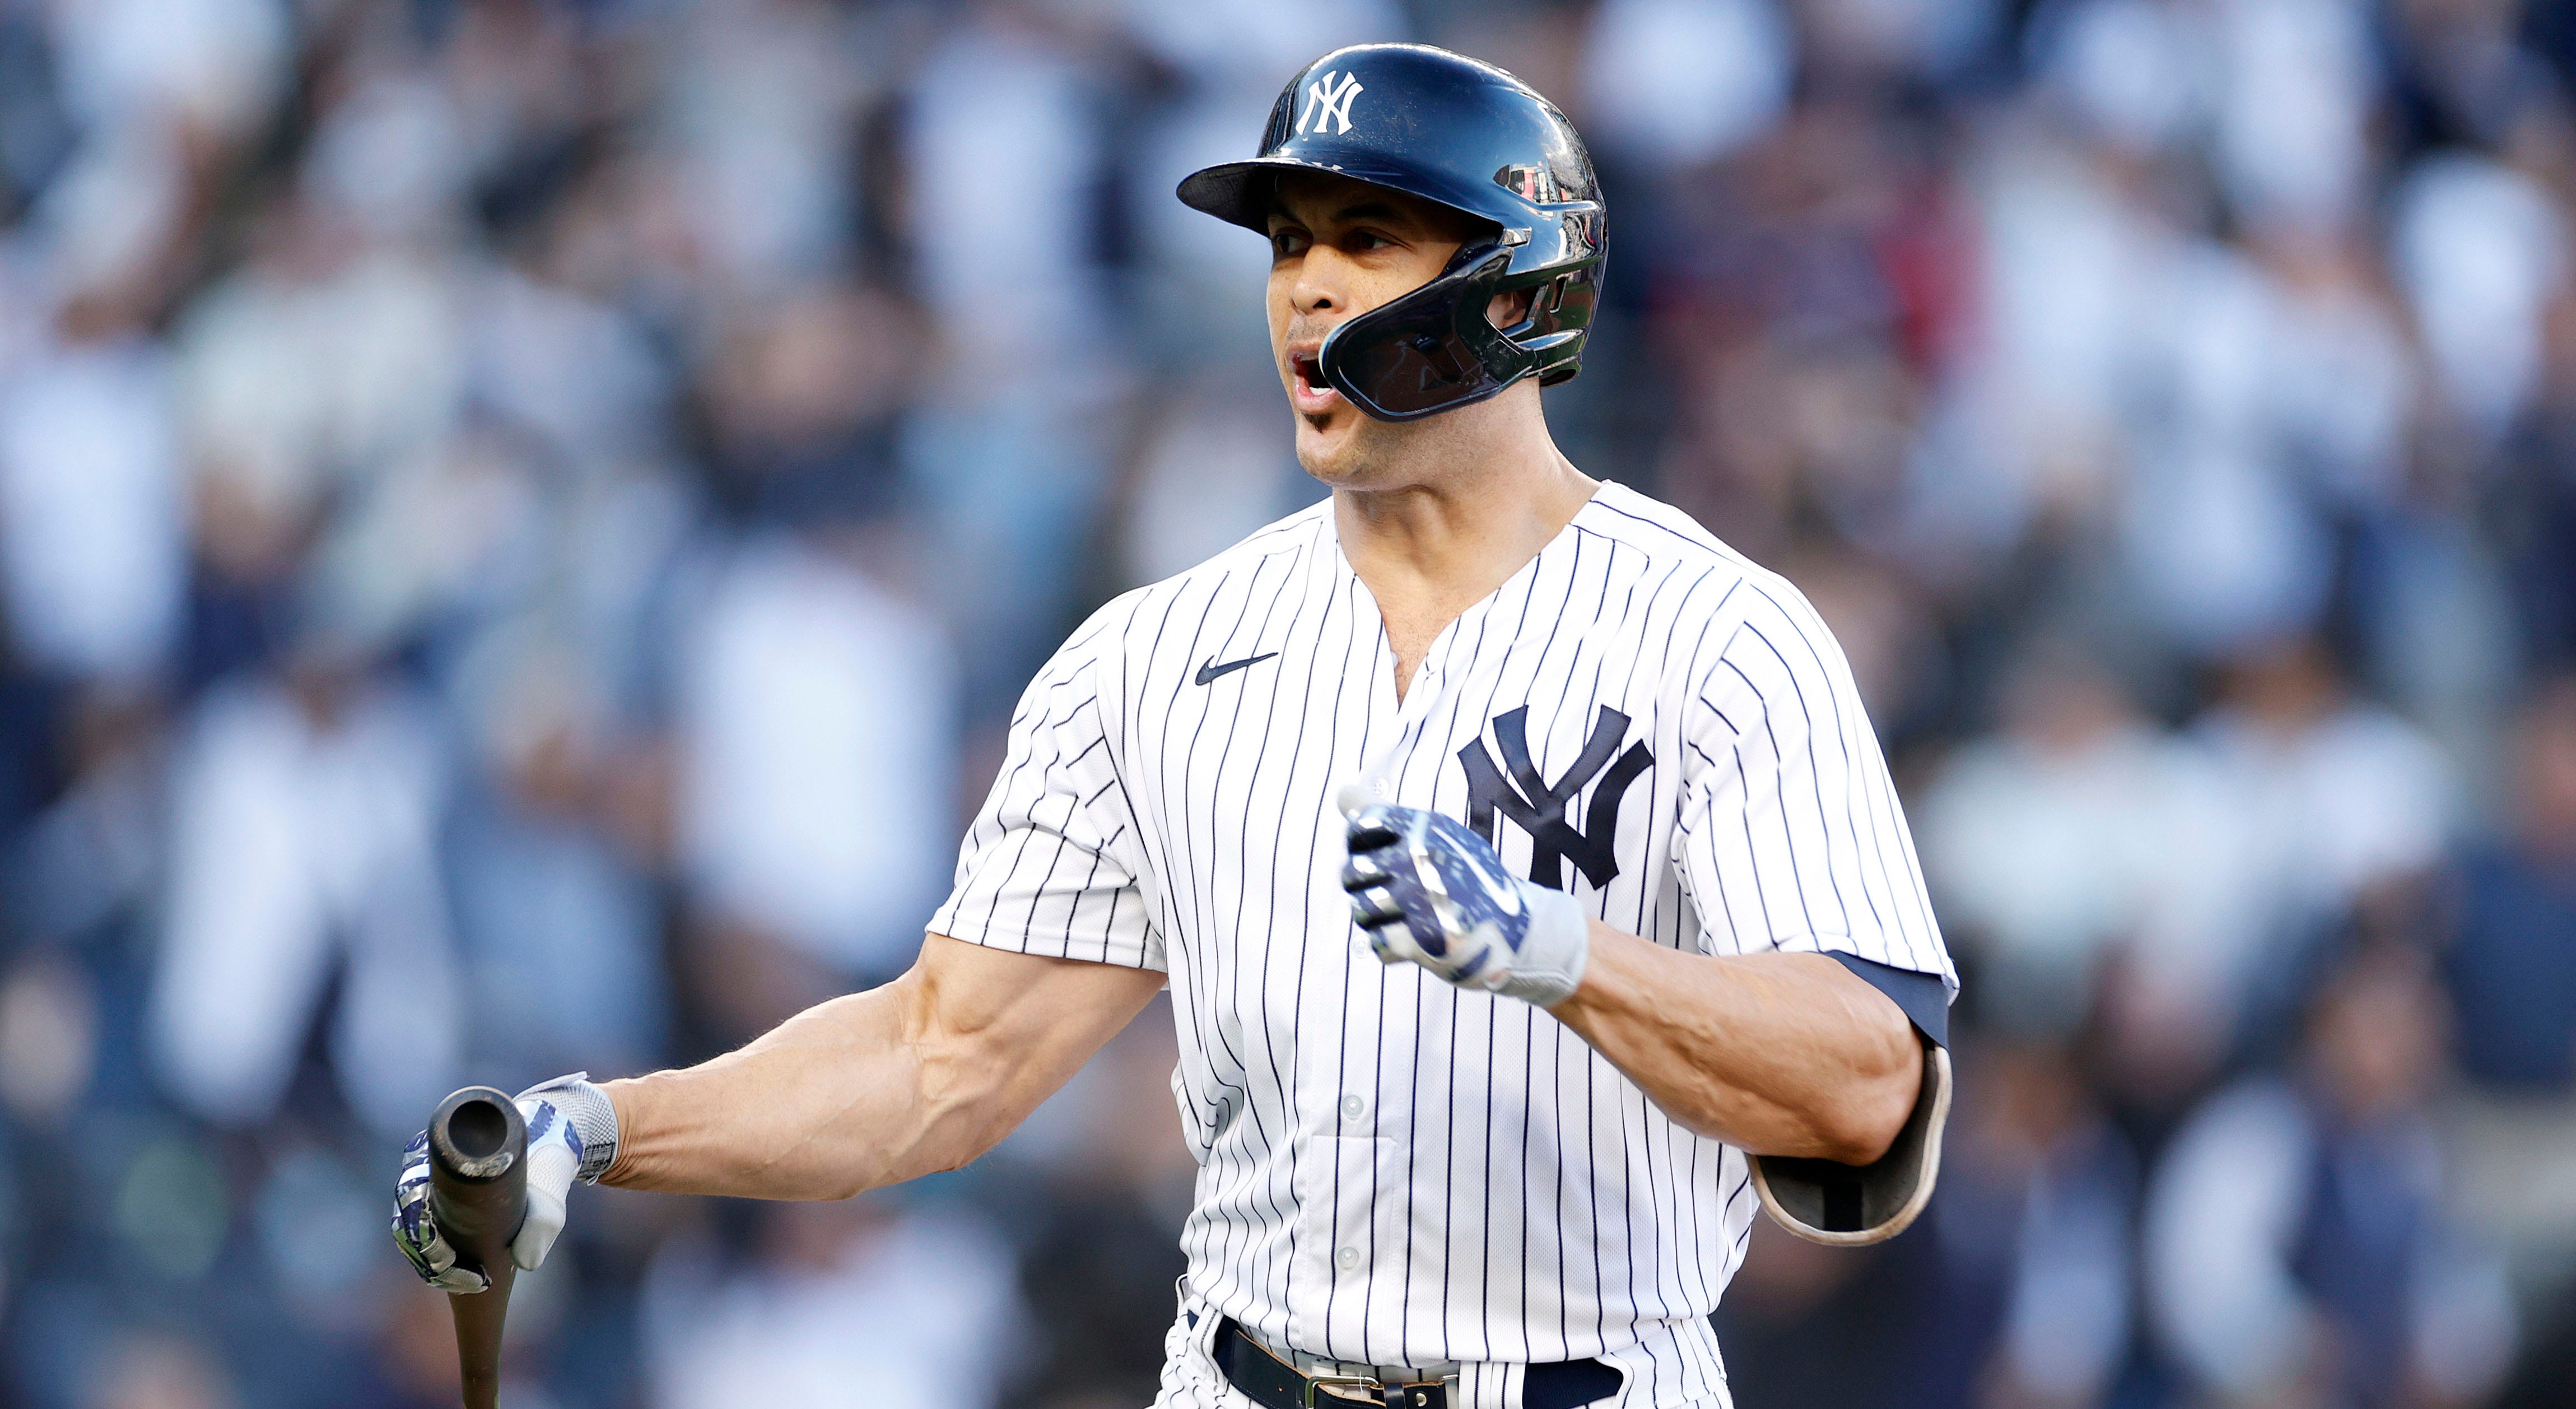 Yankees' Giancarlo Stanton reaches impressive milestone, earns curtain call  from fans